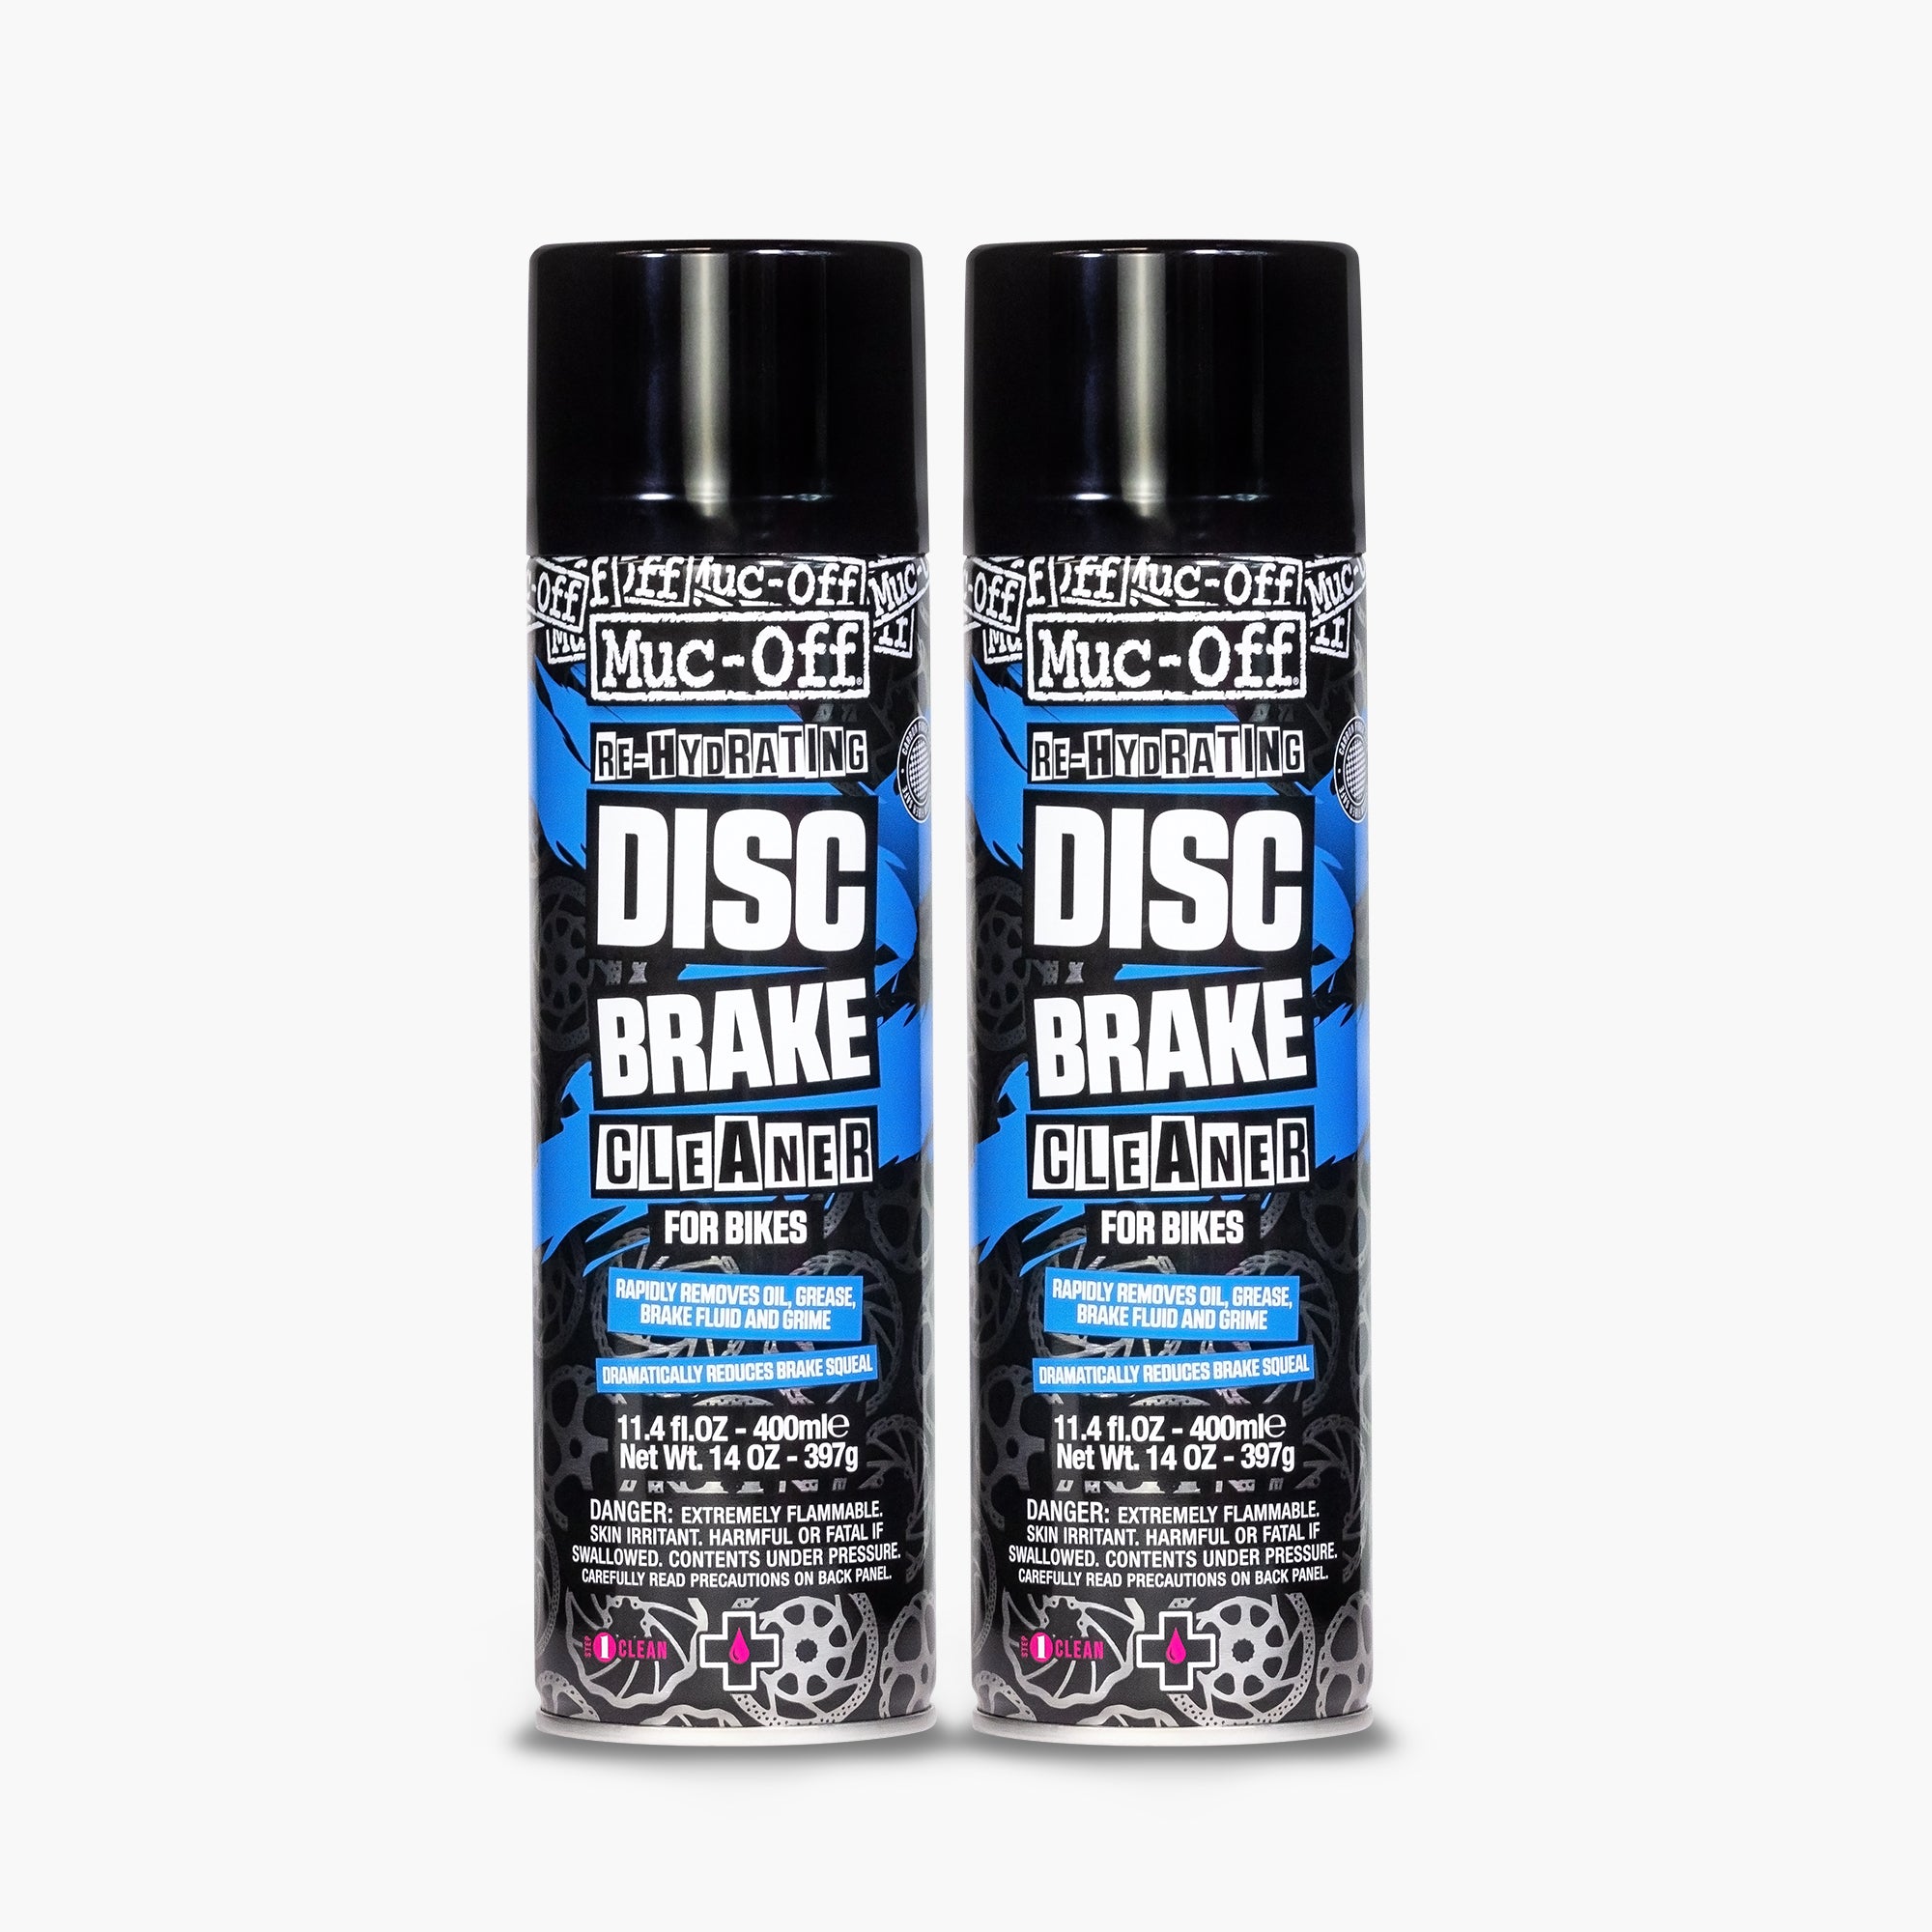 New Finish Line Disc Brake Cleaner will keep your rotors and pads